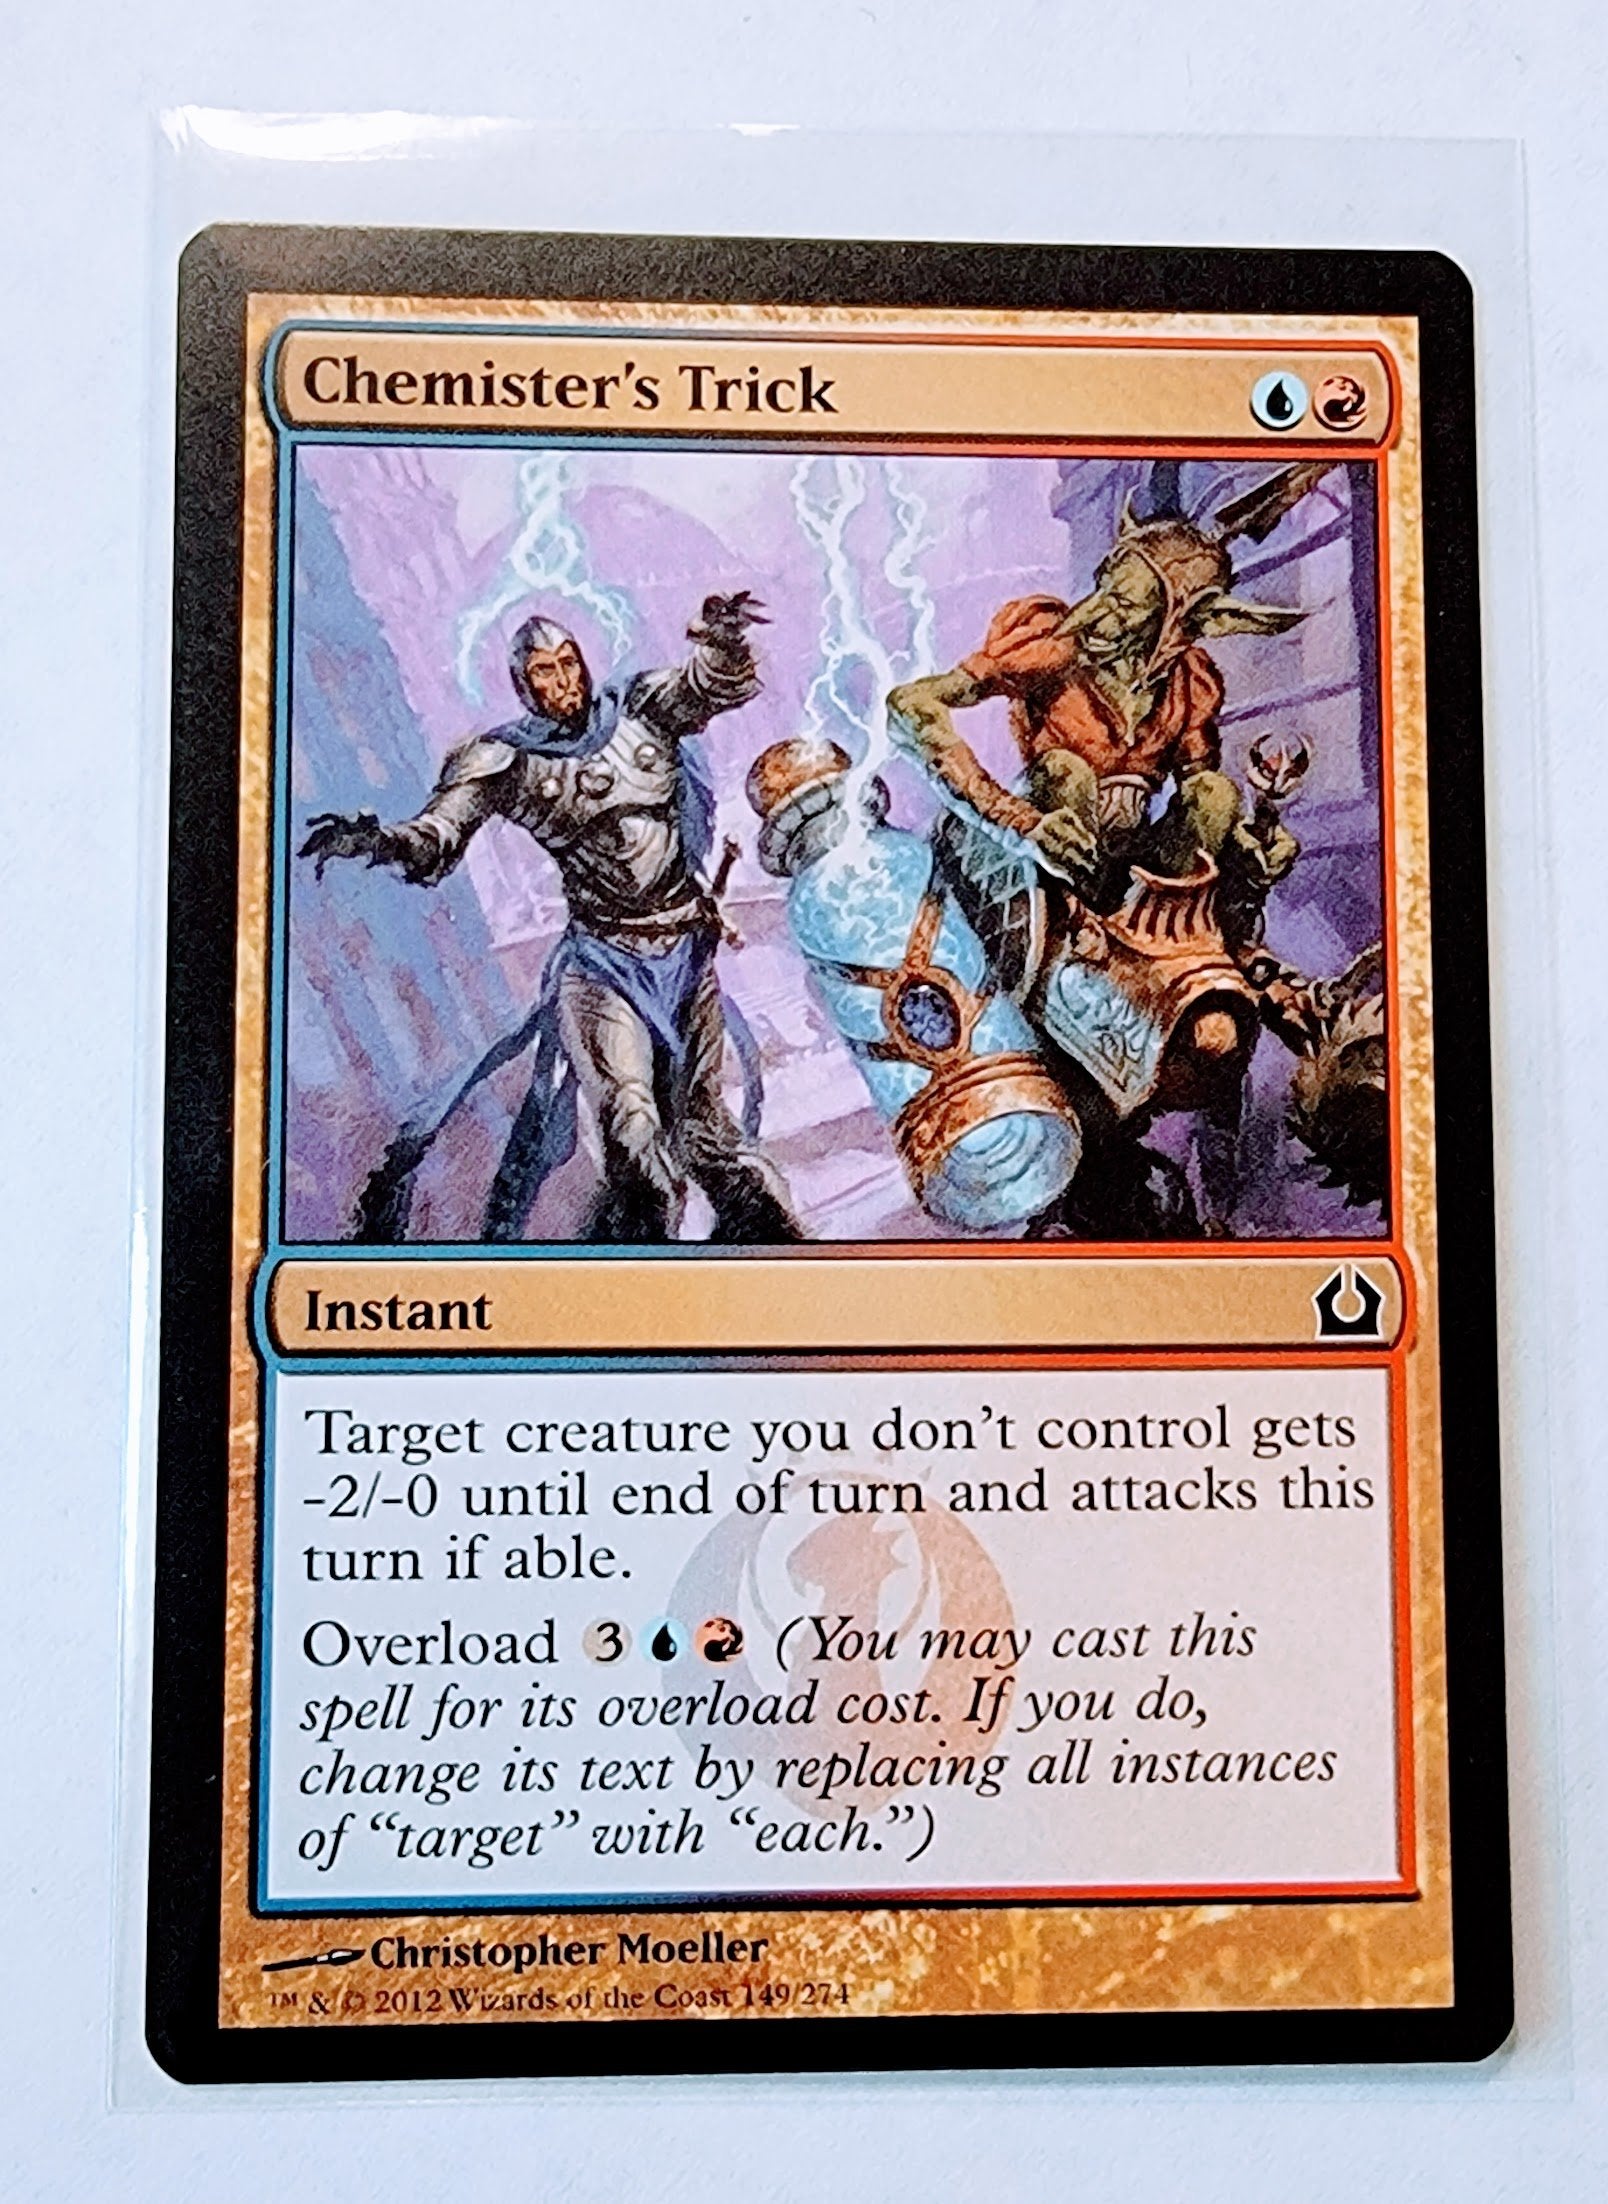 2012 Wizards of the Coast Magic: The Gathering - Chemister's Trick Booster Card MCSC1 simple Xclusive Collectibles   